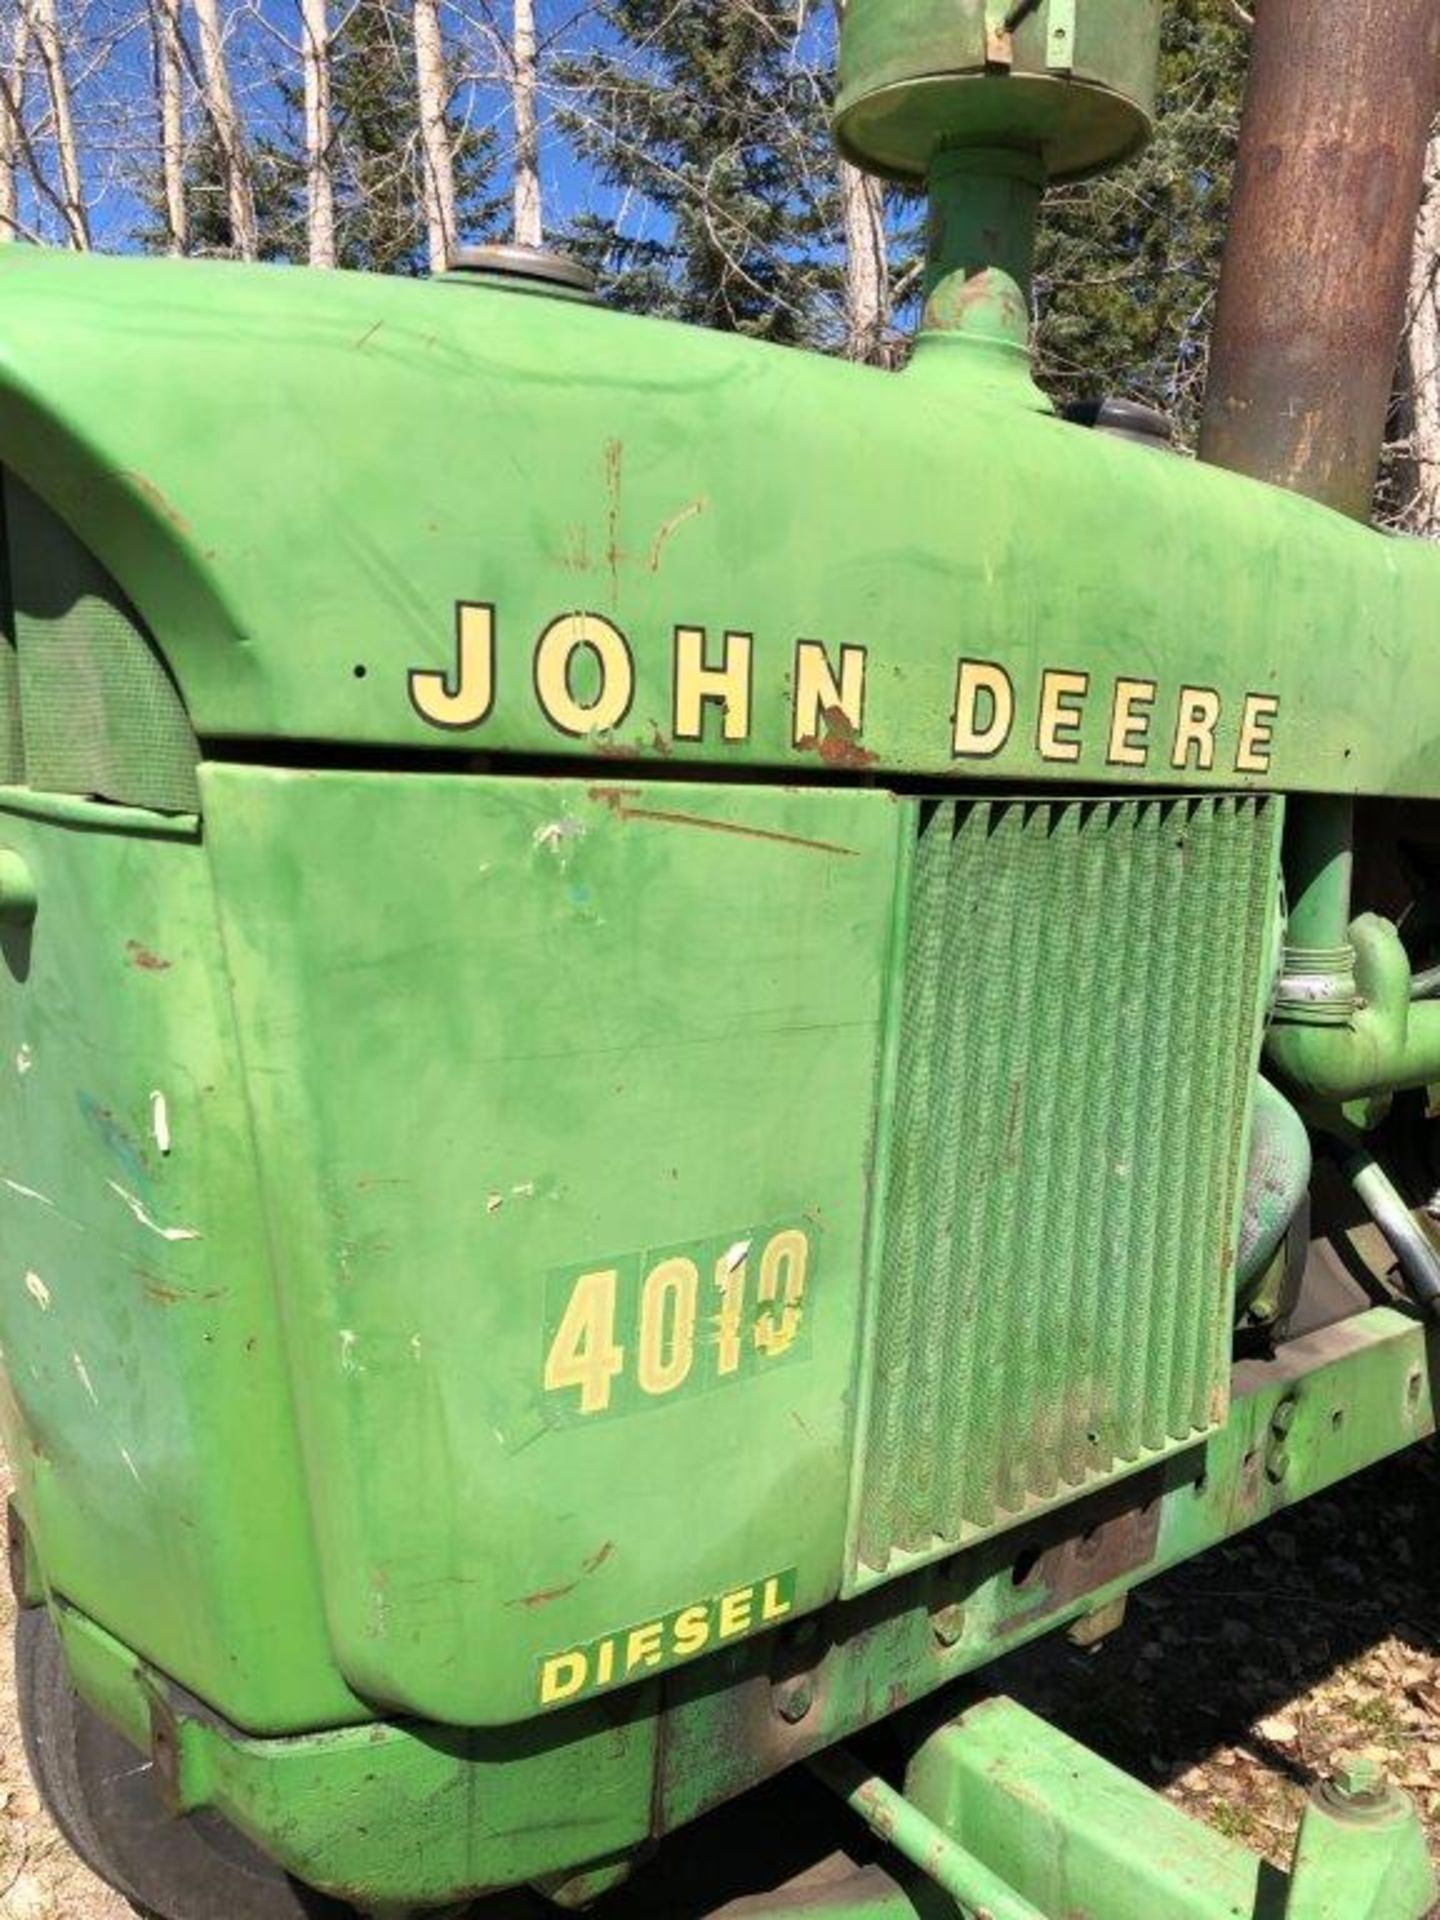 JOHN DEERE 4010 TRACTOR, DIESEL, 2WD, 18.4-34 R1 RUBBER (GOOD CONDITION), 540 PTO, S/N 401022T3600 - Image 11 of 14